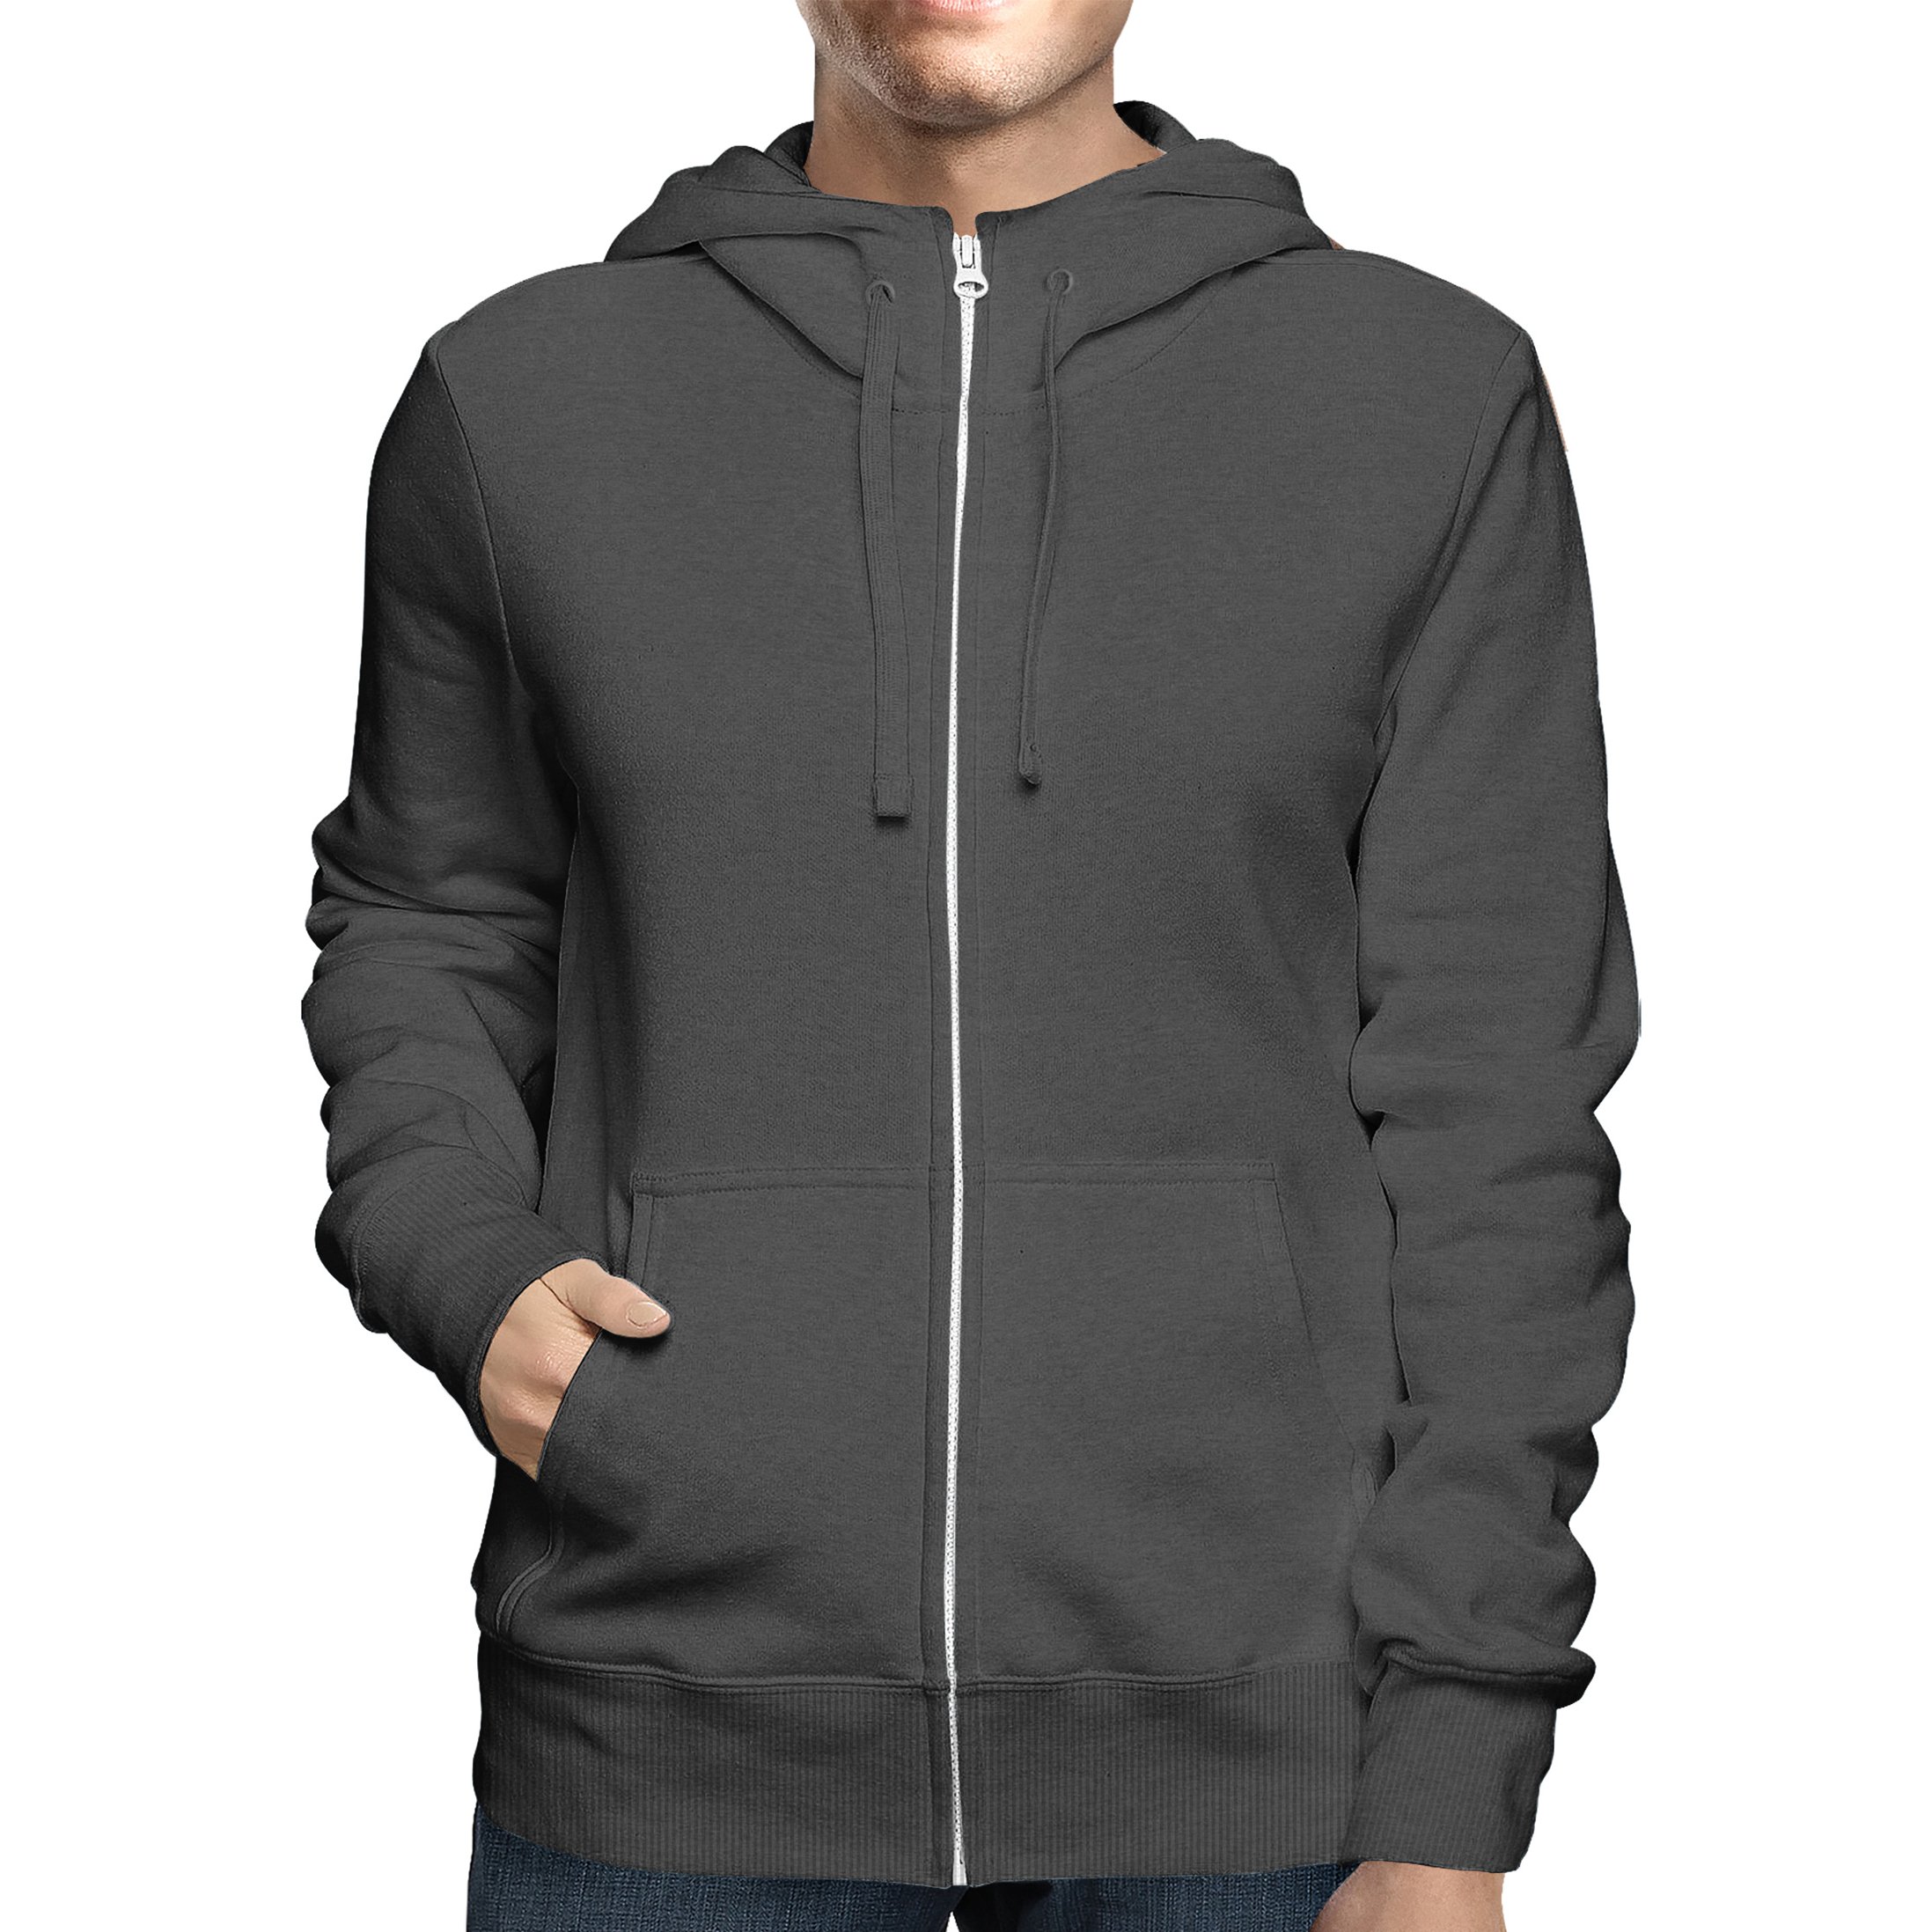 2-Pack: Men's Full Zip Up Fleece-Lined Hoodie Sweatshirt (Big & Tall Size Available) - Charcoal, Small